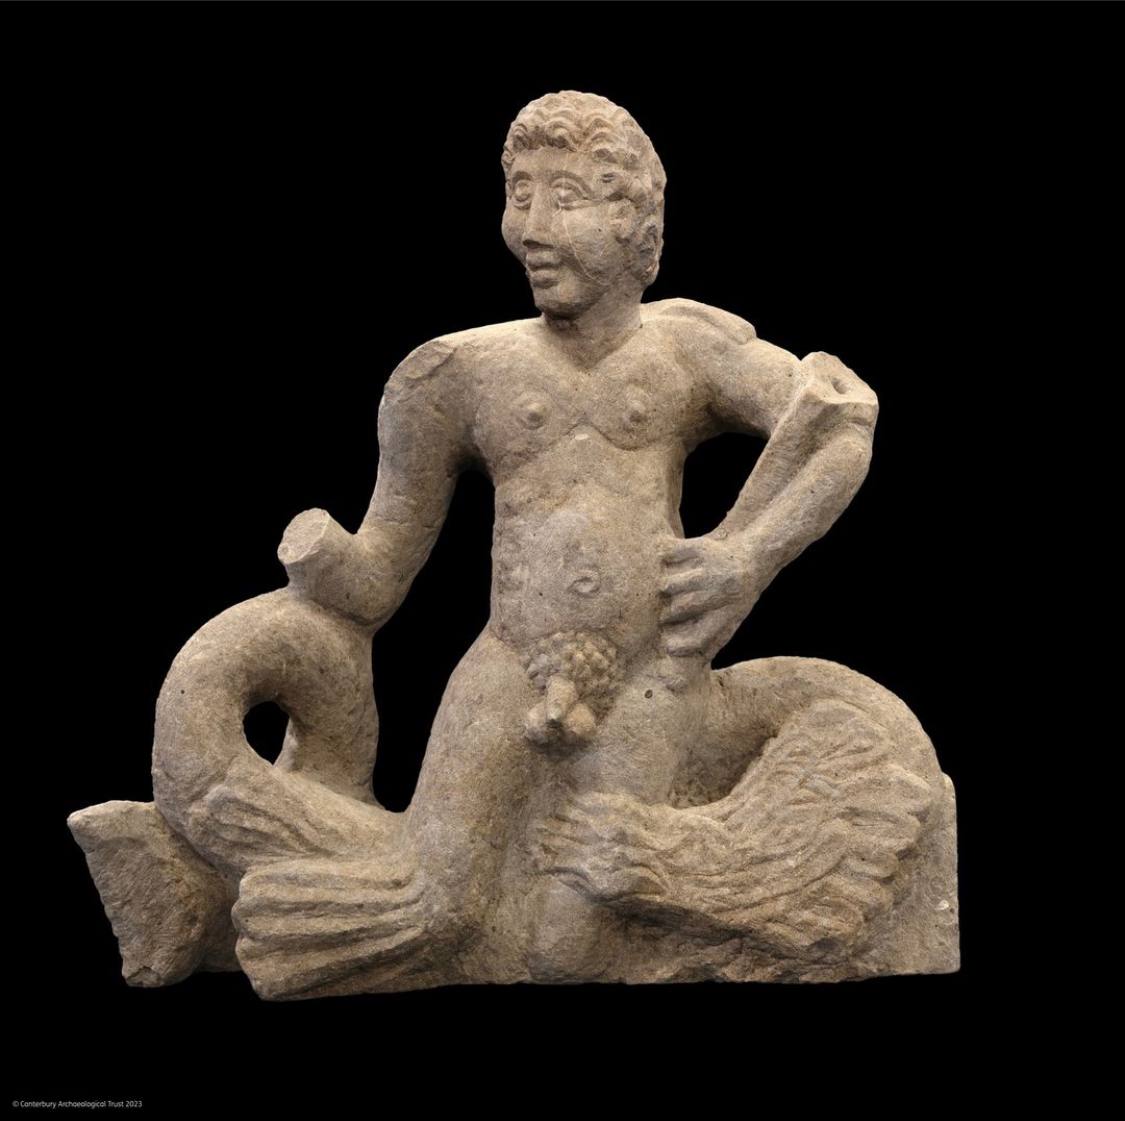 A Trite statue that was found in England 